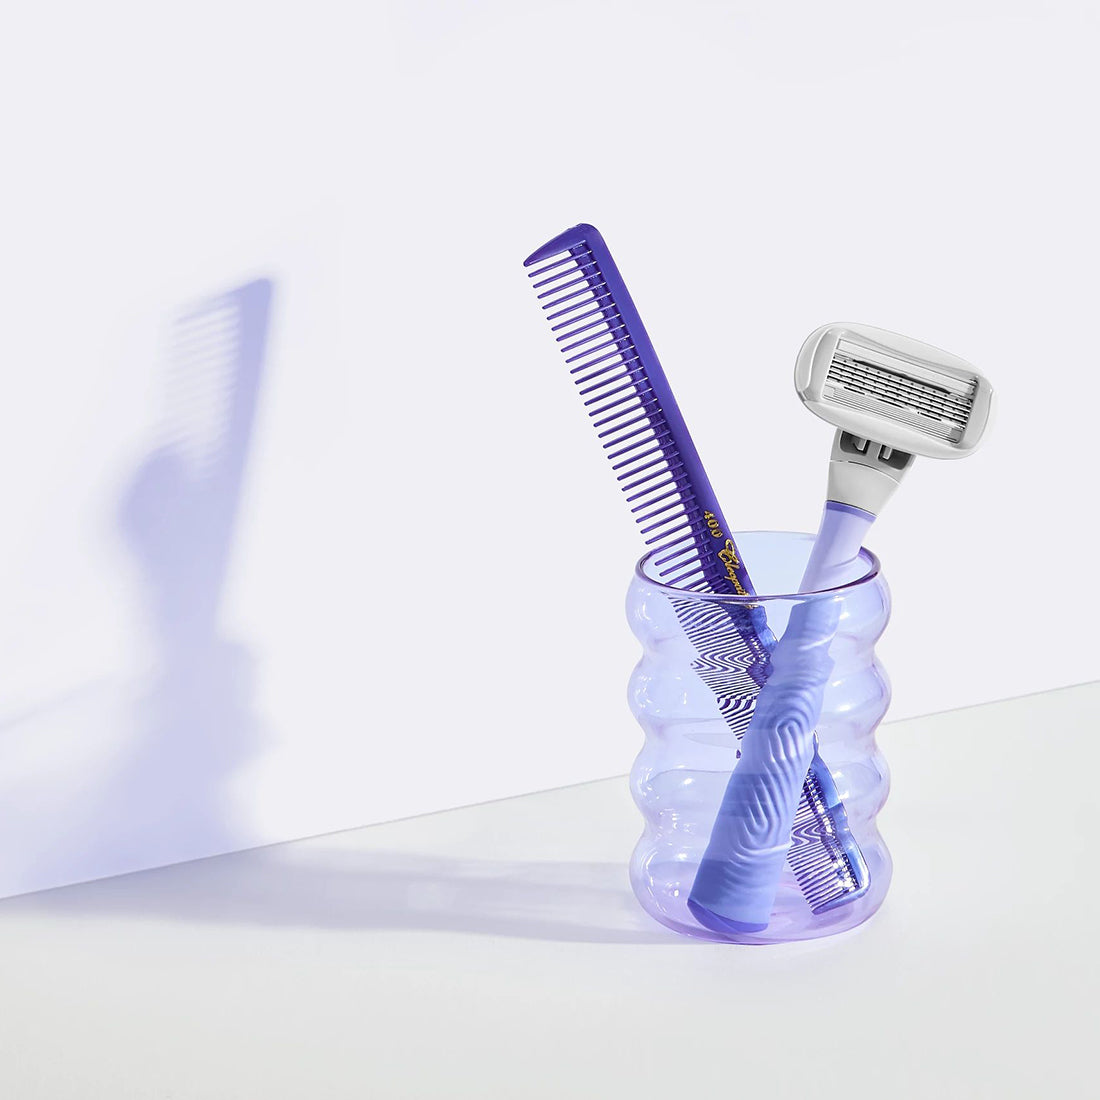 Flamingo Lilac Razor in a funky purple clear glass cup that also contains a dark purple comb